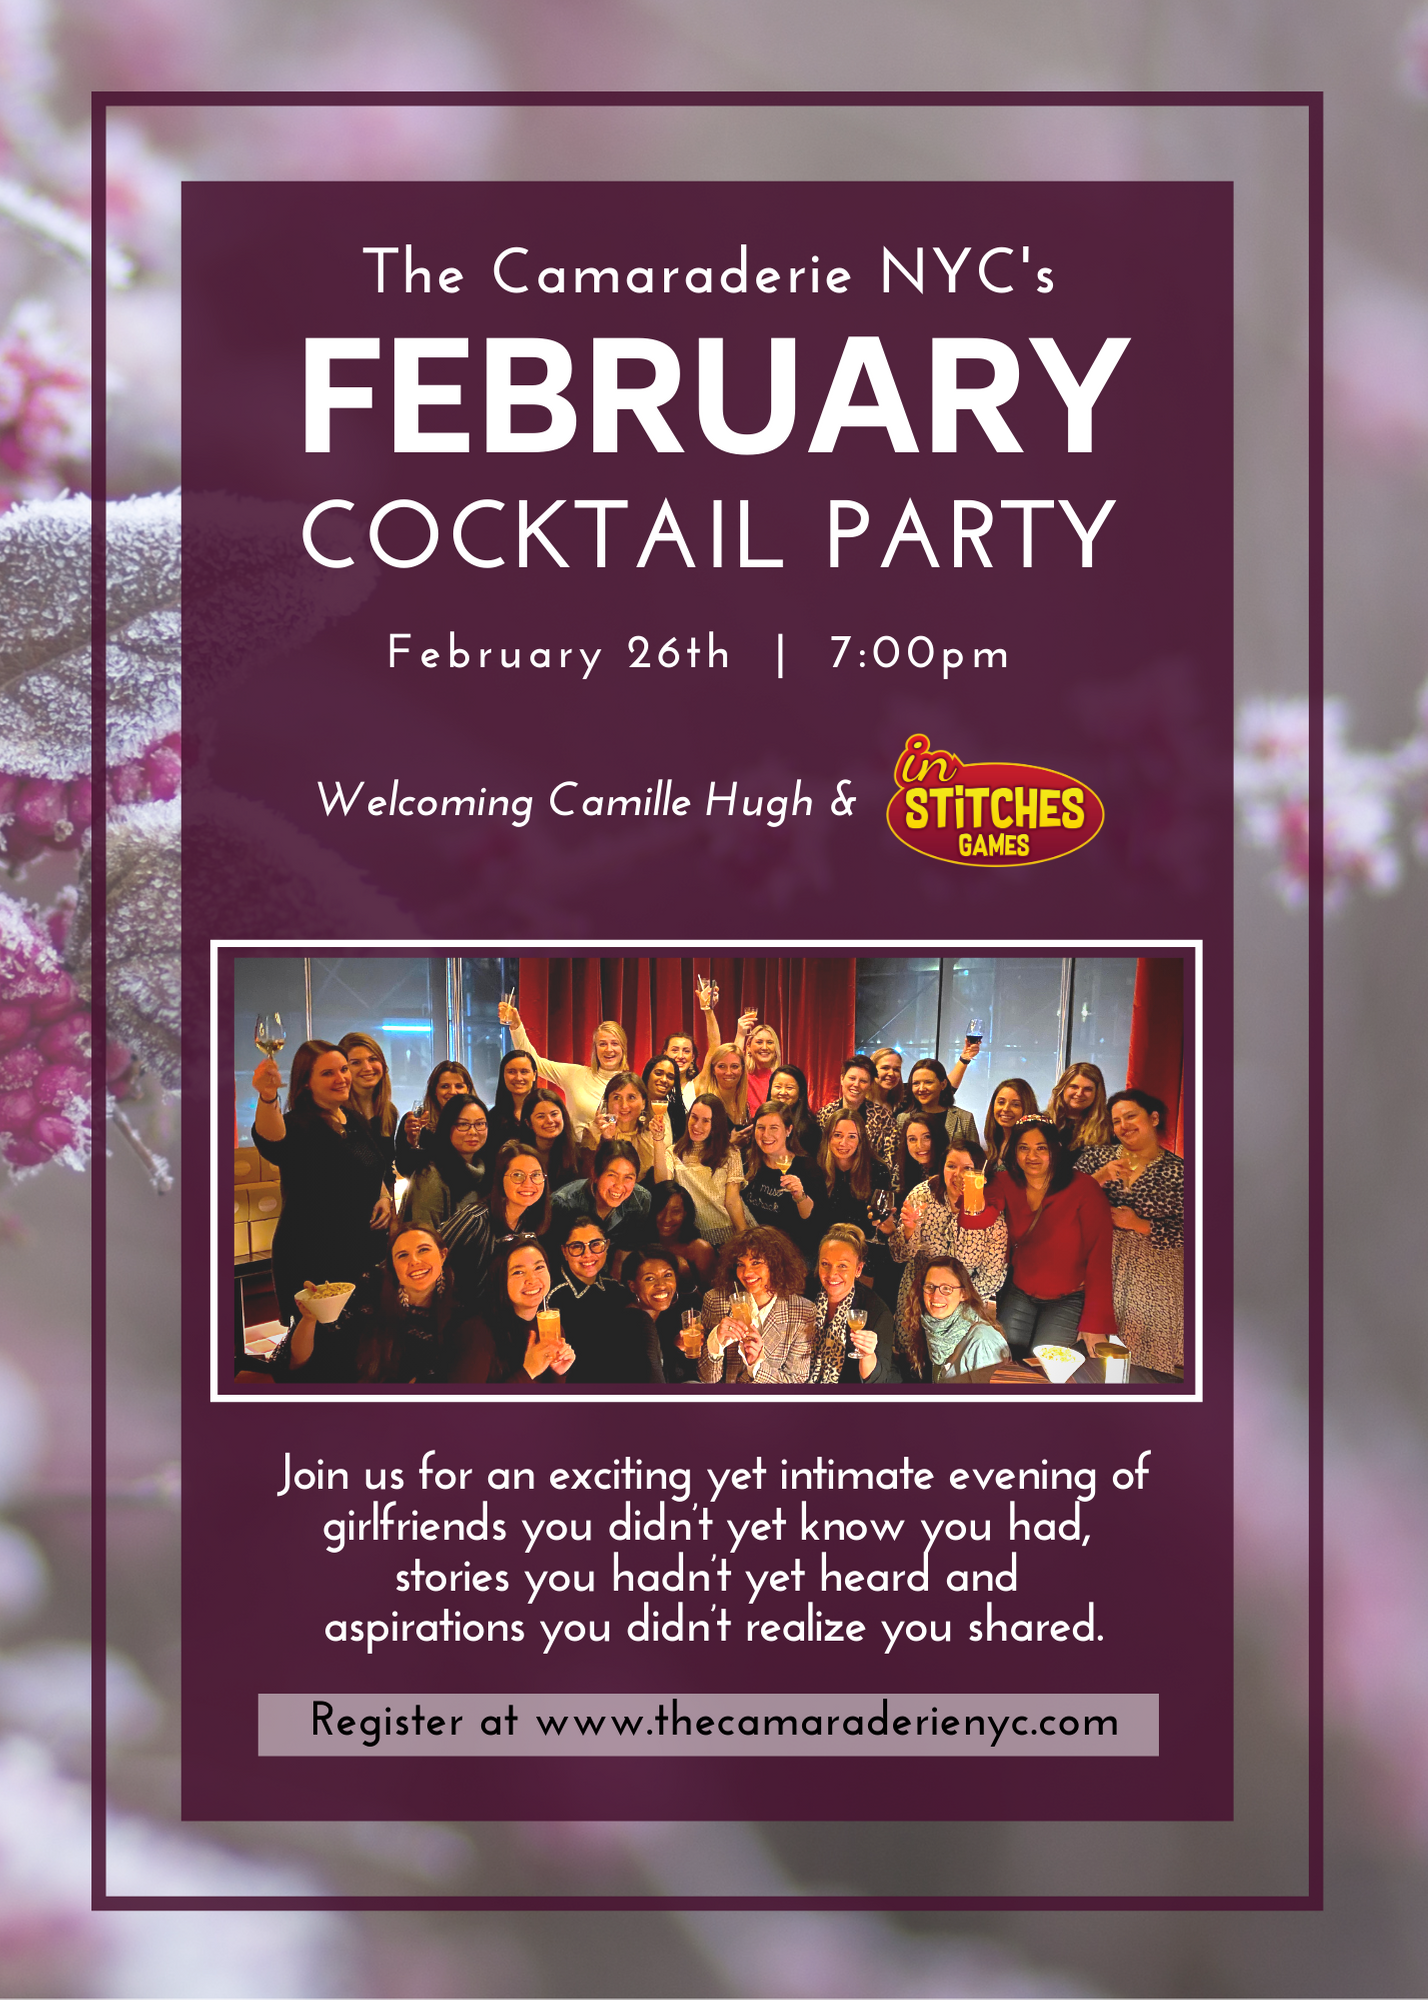 February Cocktail Party with The Camaraderie NYC